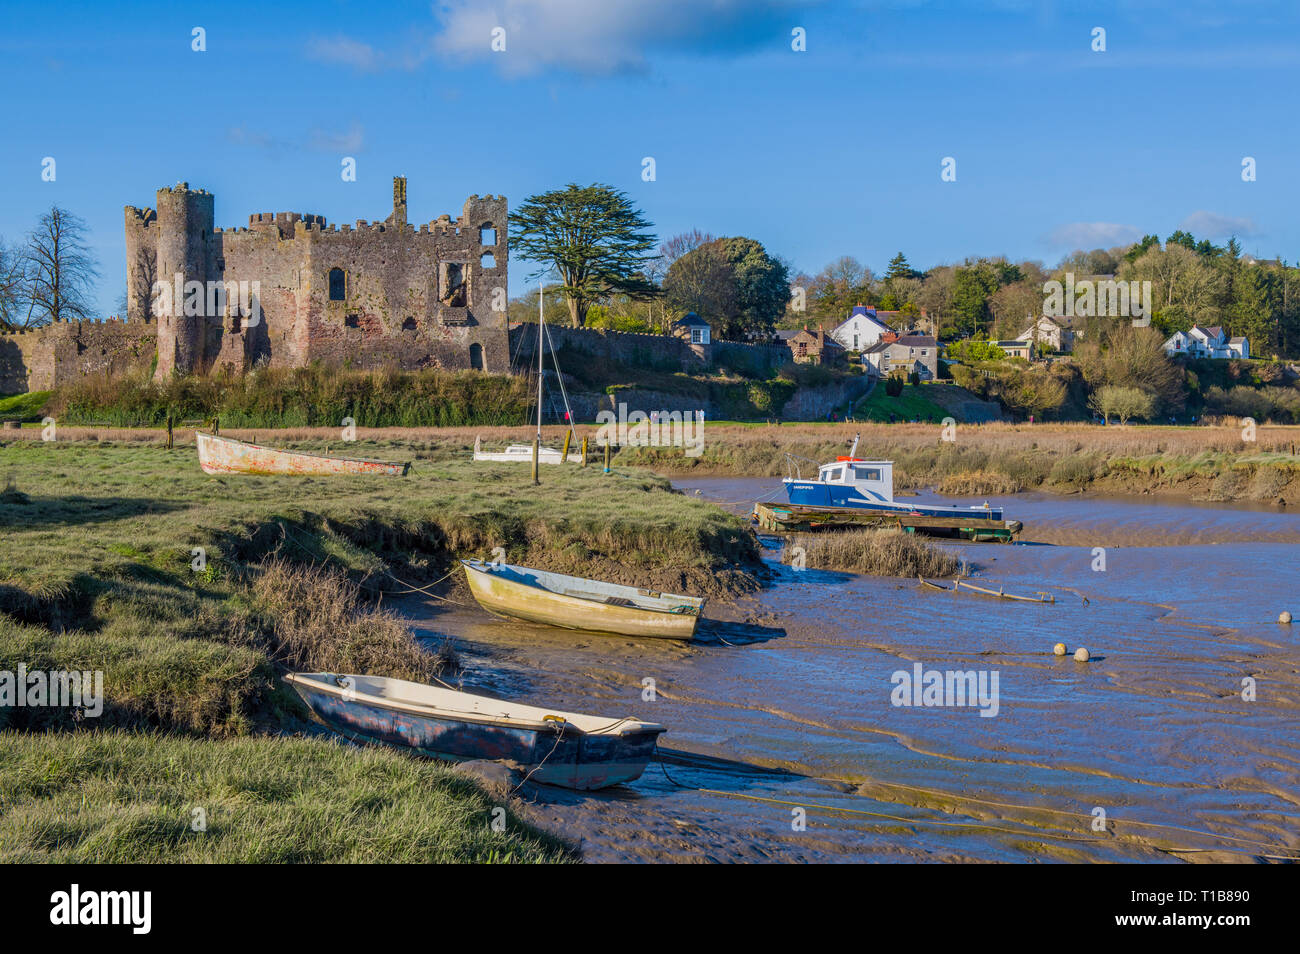 Laugharne Castle Carmarthenshire South Wales. Laugharne was home to Dylan Thomas and is a pretty and peaceful village on the Carmarthenshire coast. Stock Photo